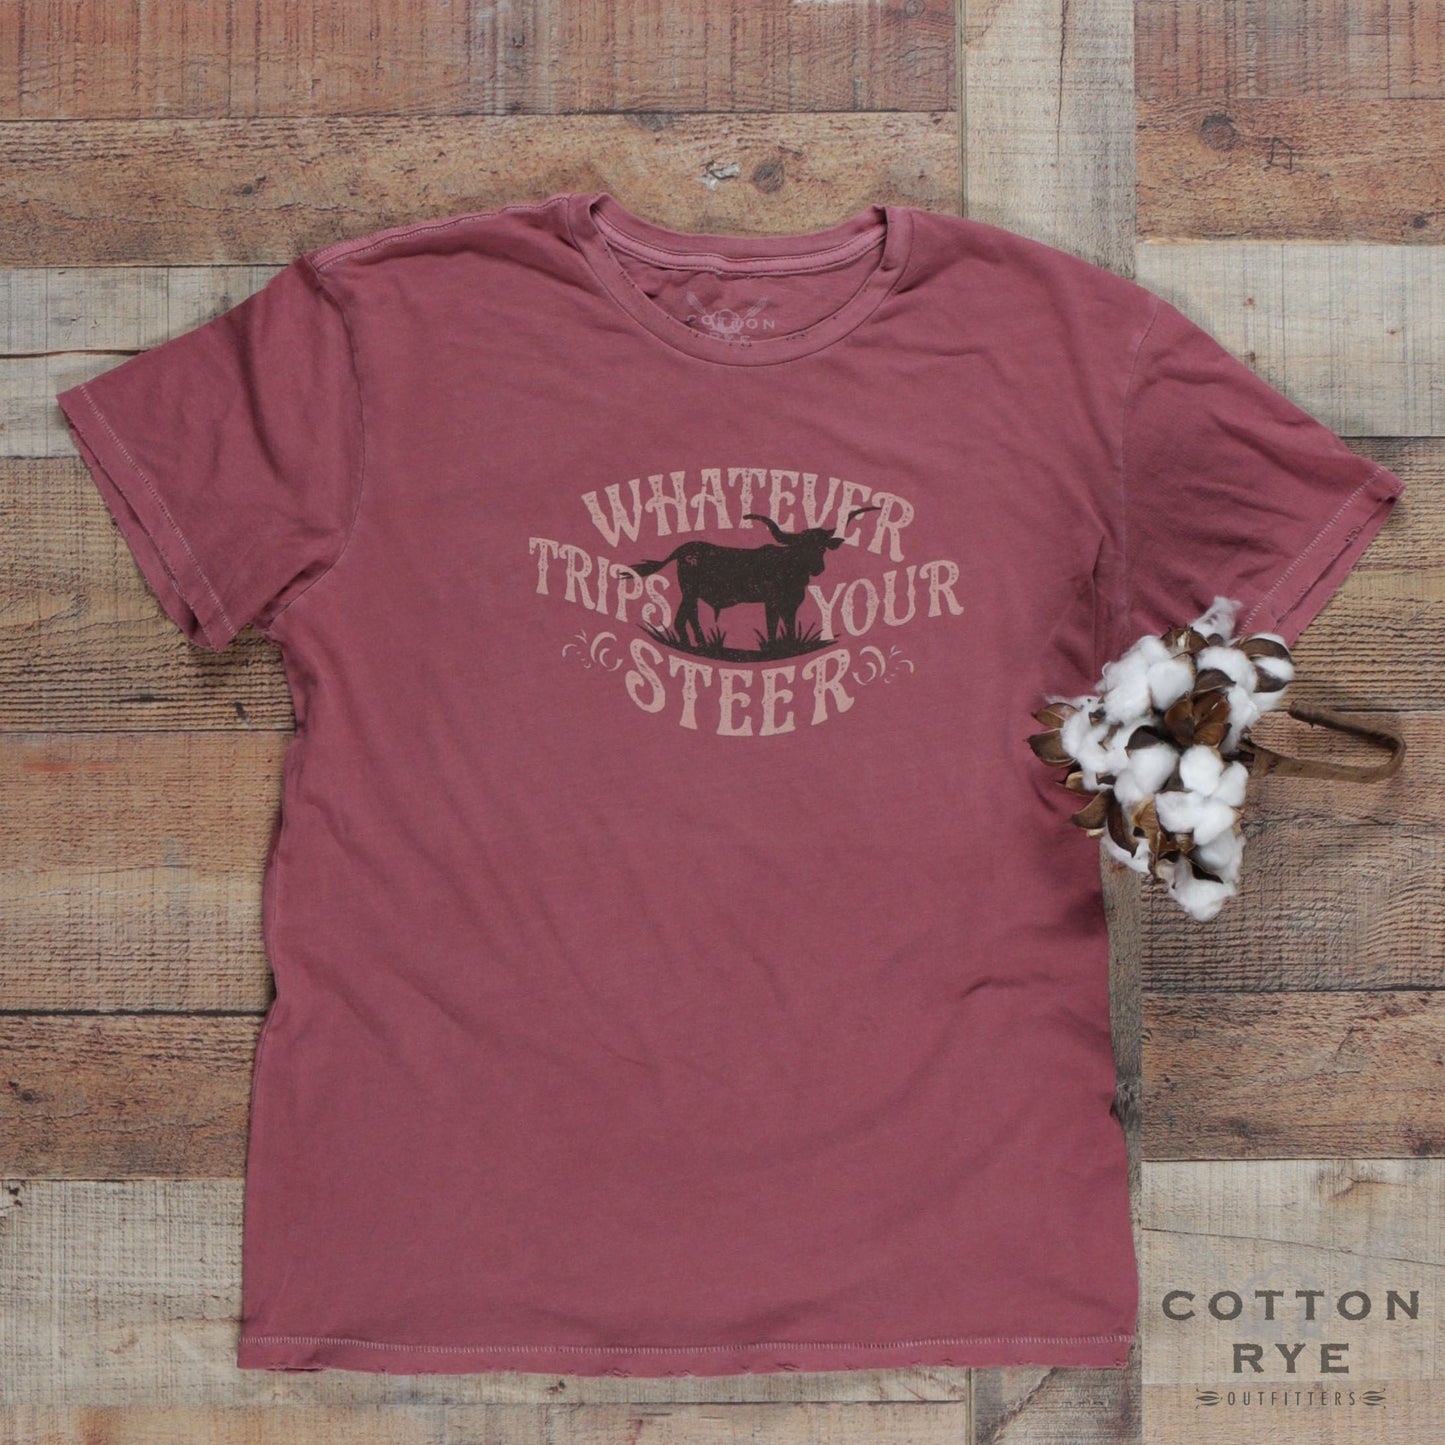 Steer Trippin' Graphic Tee